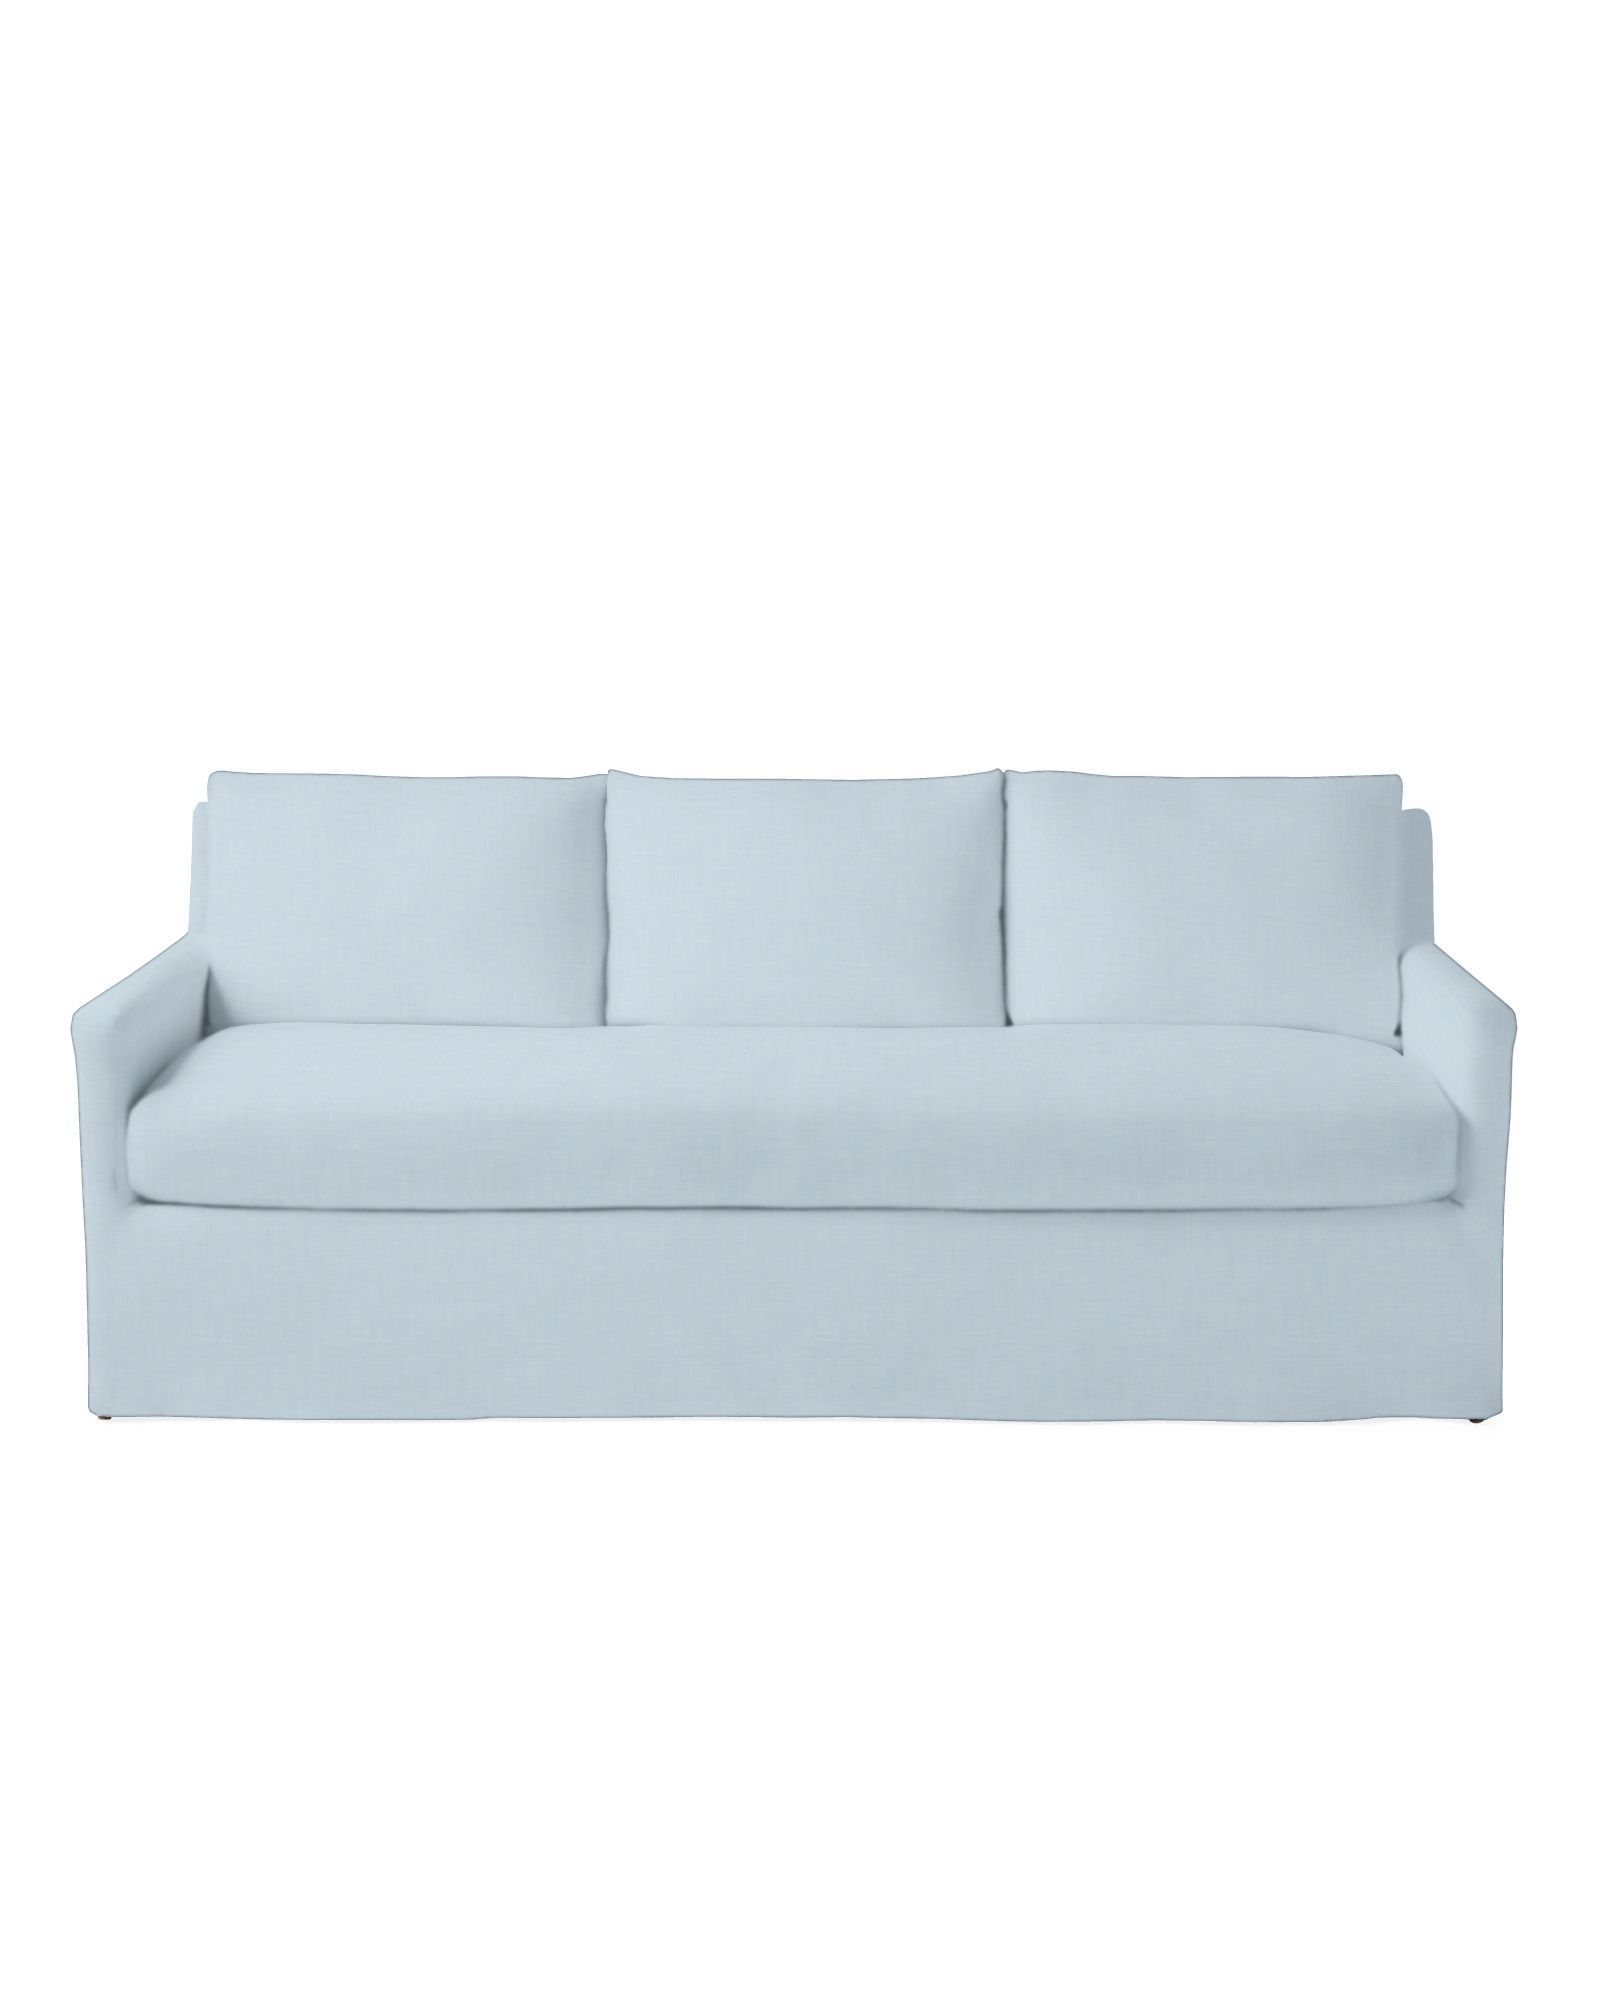 Spruce Street Slipcovered Sofa | Serena and Lily